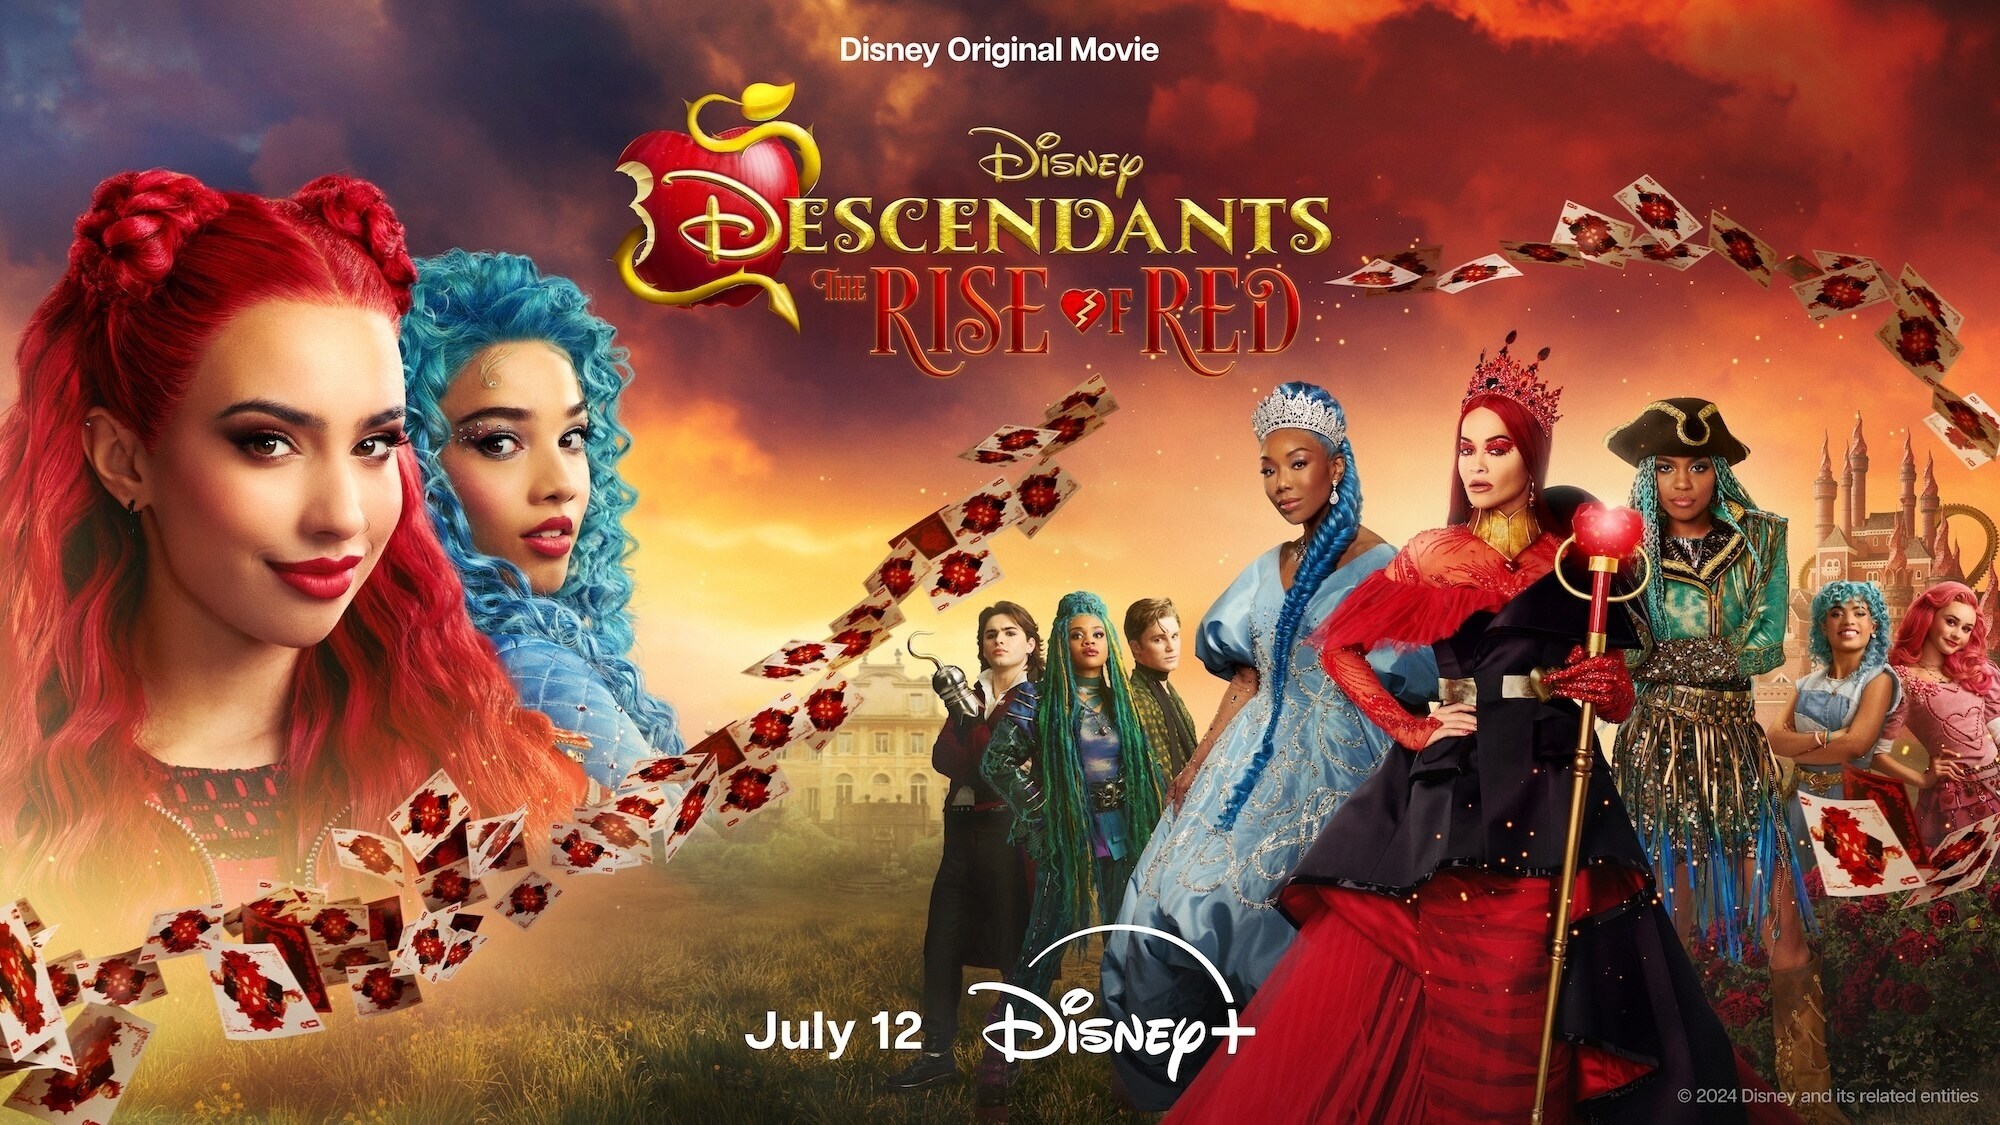 Official Trailer Revealed For ‘Descendants: The Rise Of Red’